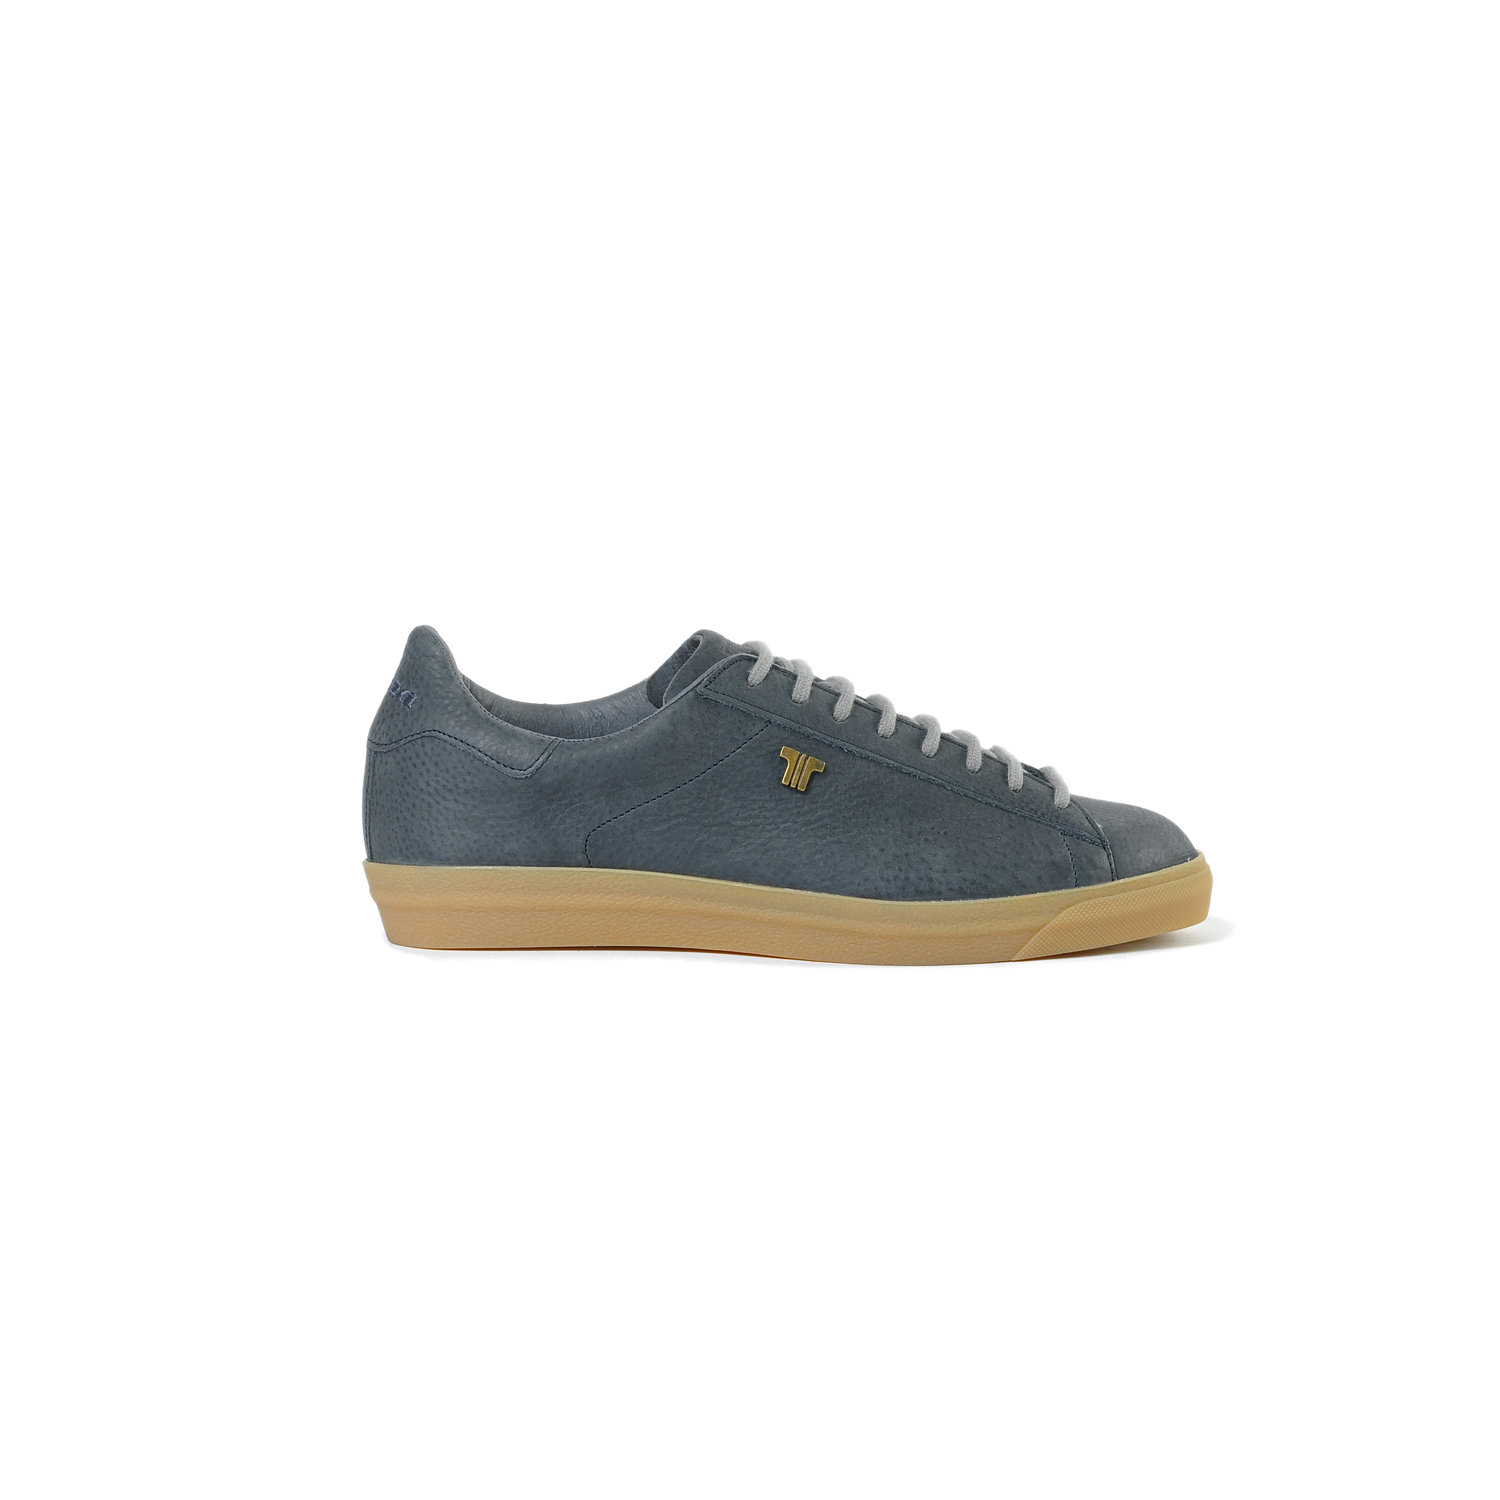 Tisza shoes - Simple - Navy